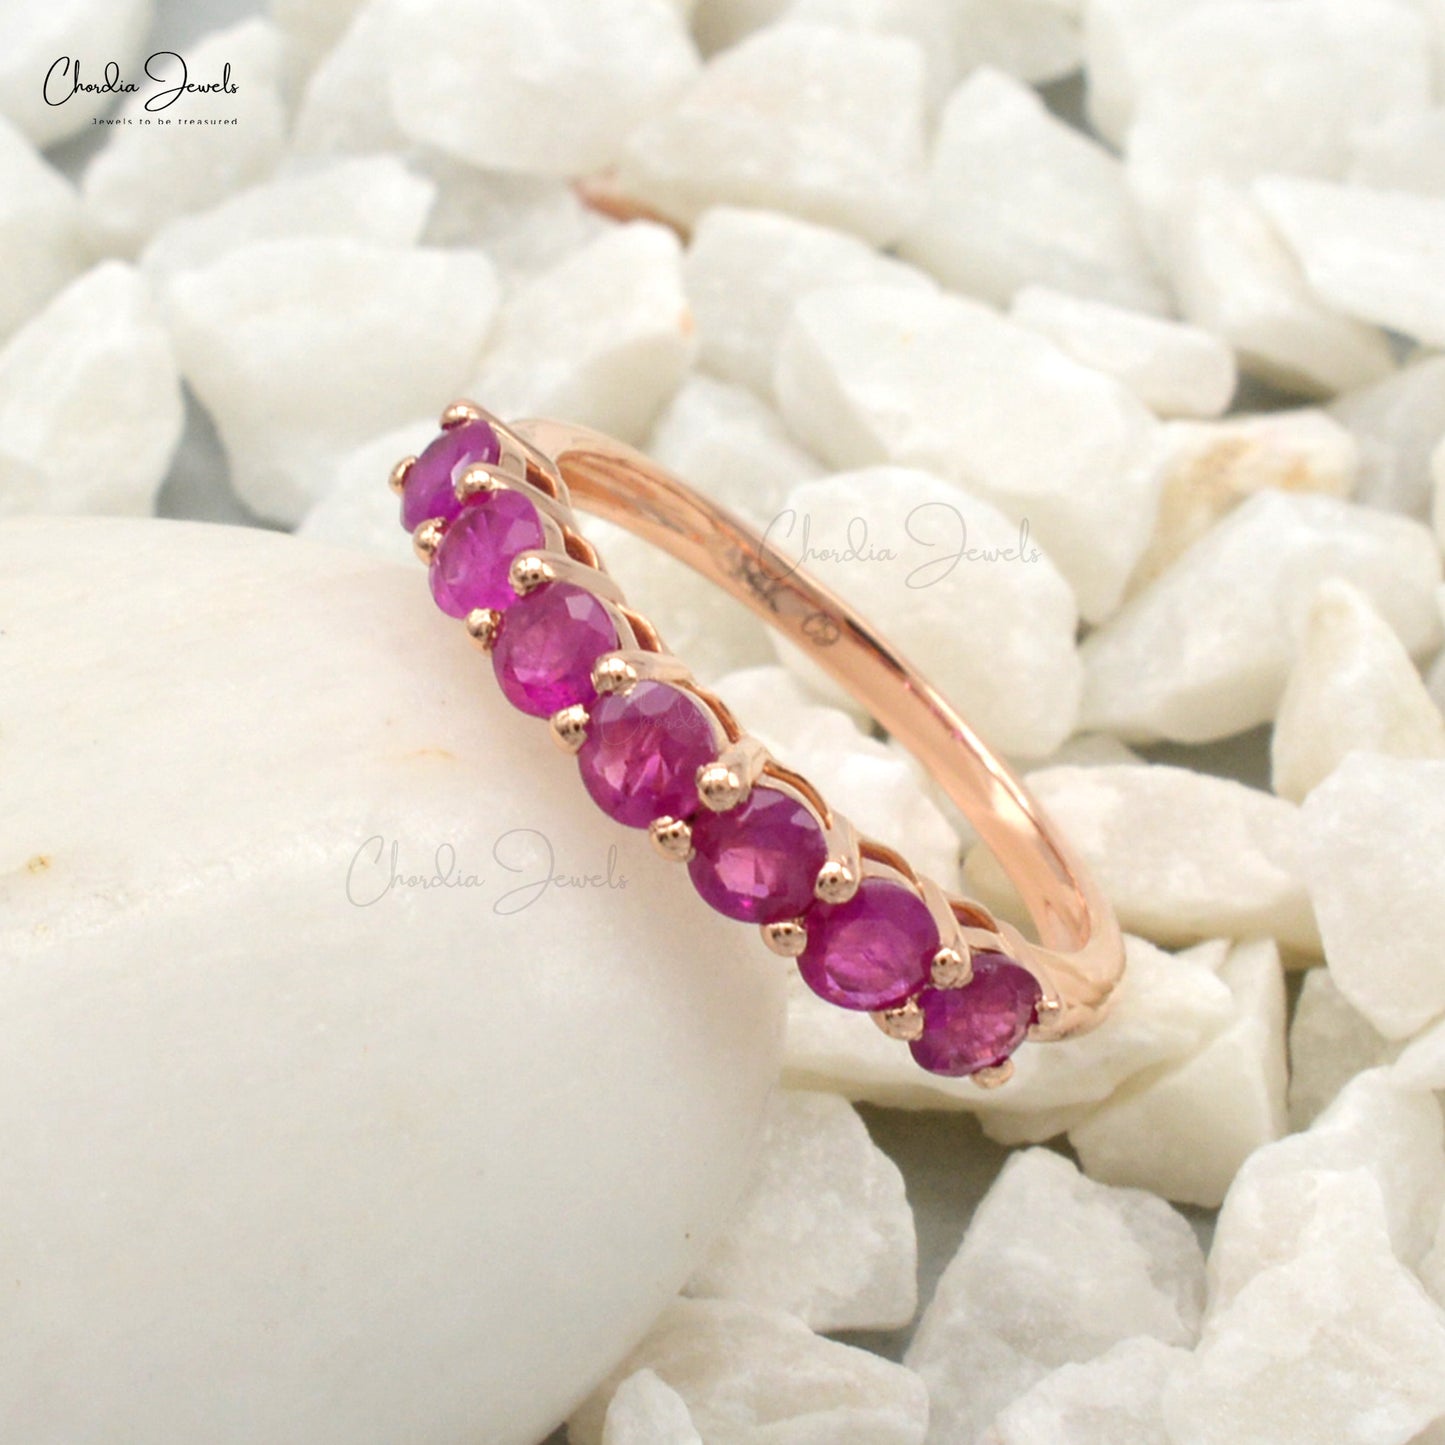 Load image into Gallery viewer, Solid 14k Rose Gold 7 Stone Ring with Genuine 3mm Ruby Handcrafted Half Eternity Ring
